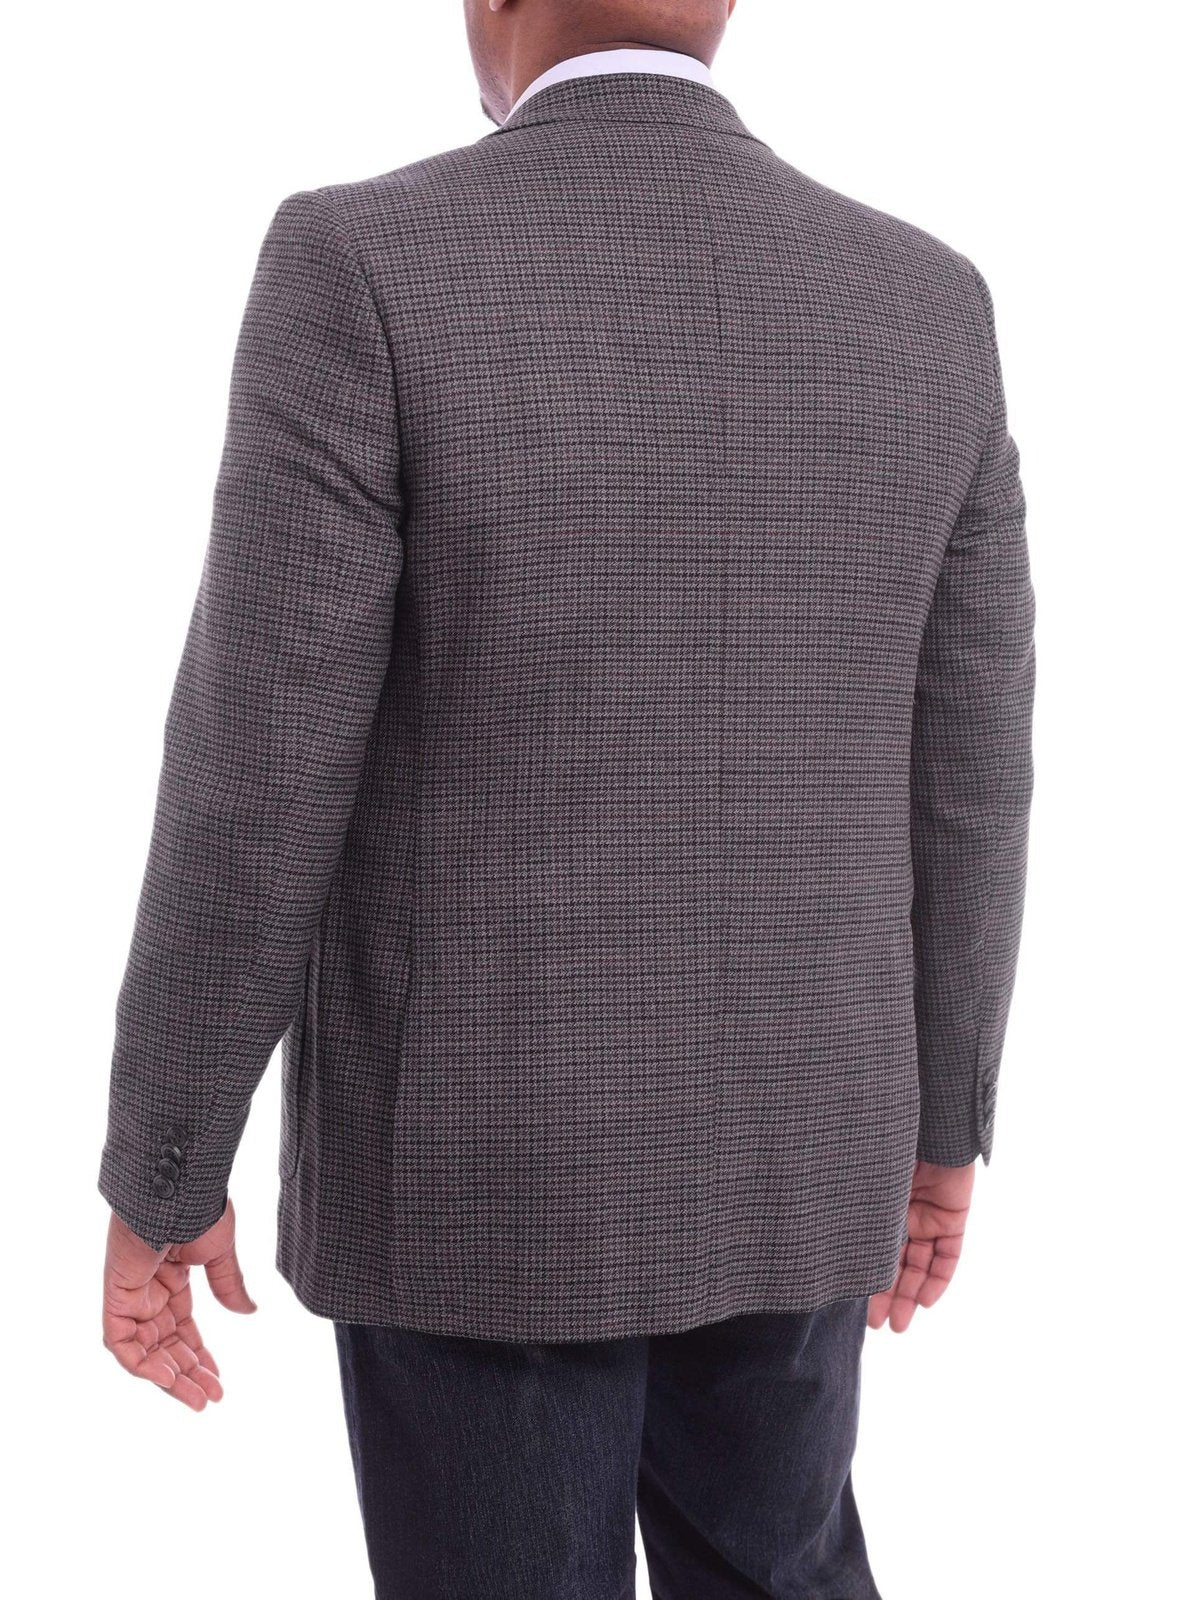 Mens Prontomoda Classic Fit Gray Houndstooth Two Button Wool Blazer Sportcoat - The Suit Depot